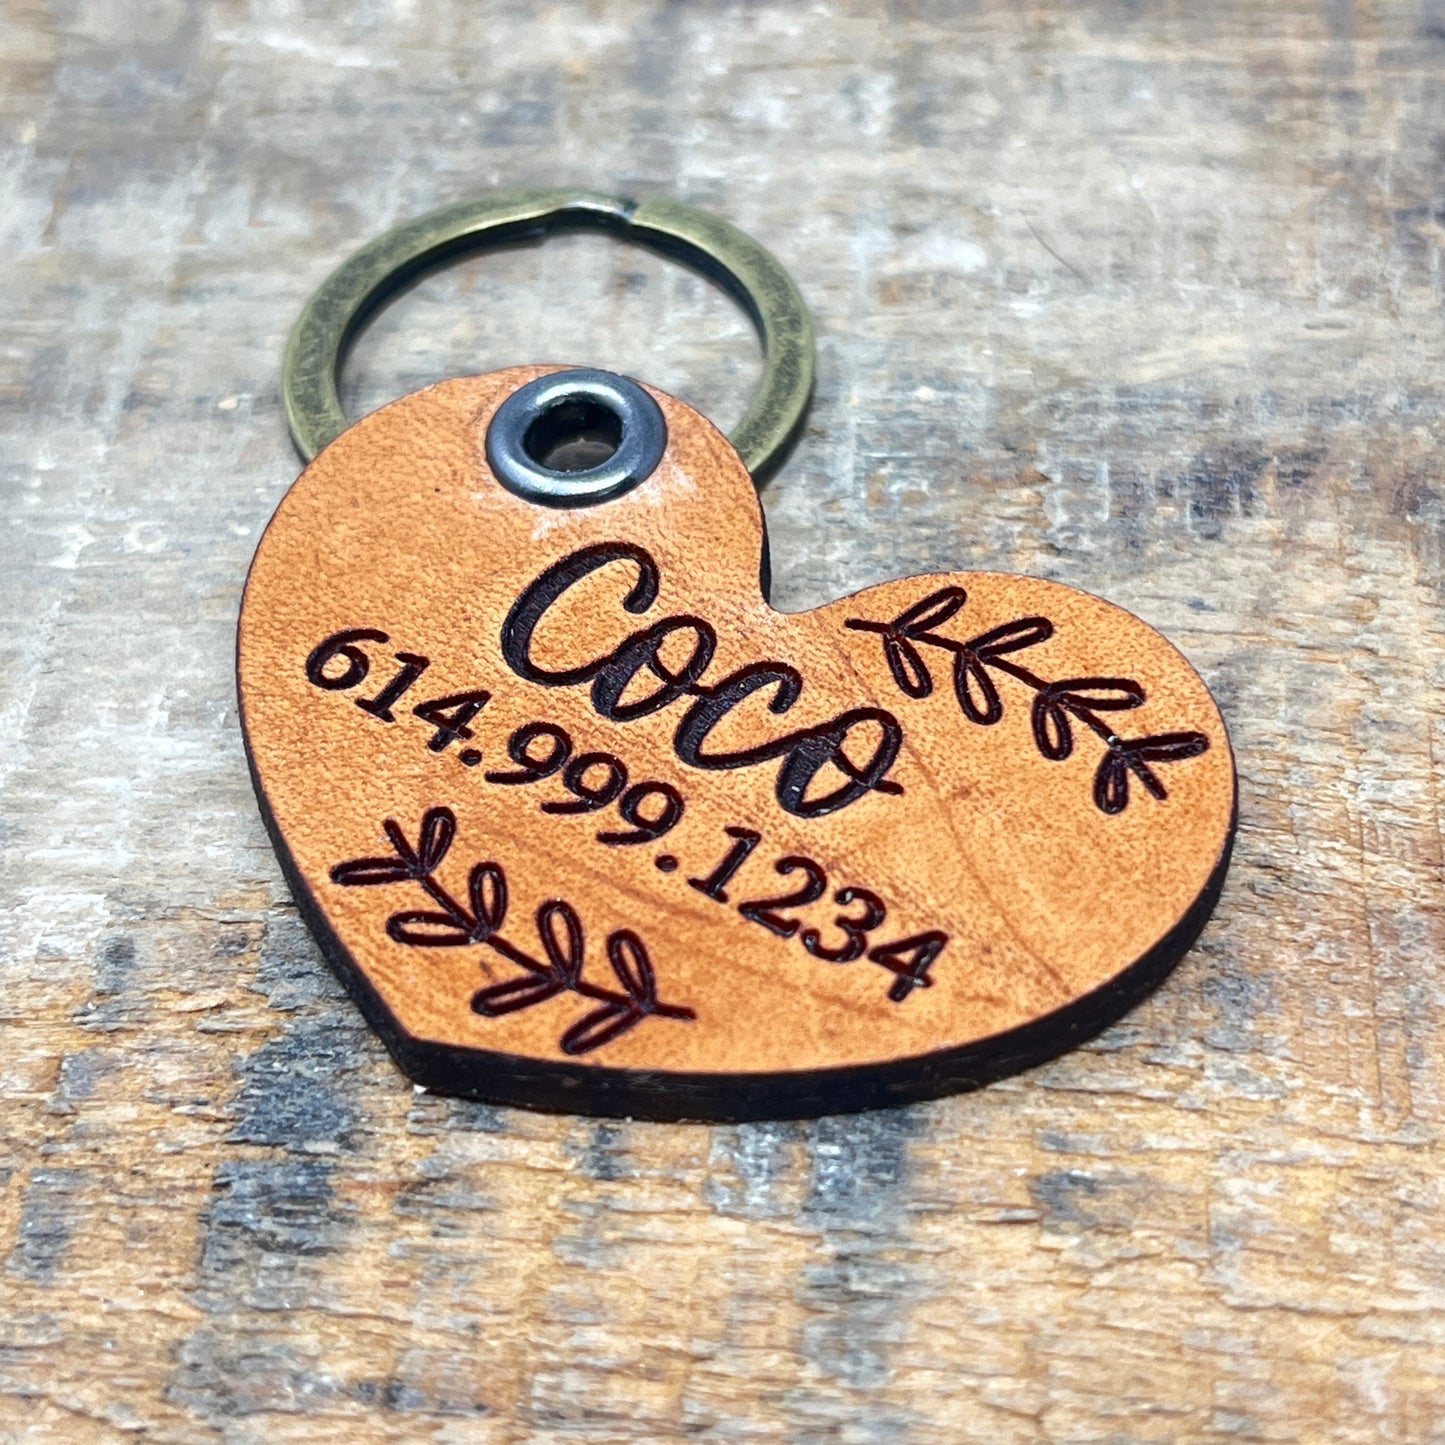 Heart Shaped Dog Tag, Quiet Dog Tag, Laser Engraved Genuine Leather Pet ID Tag